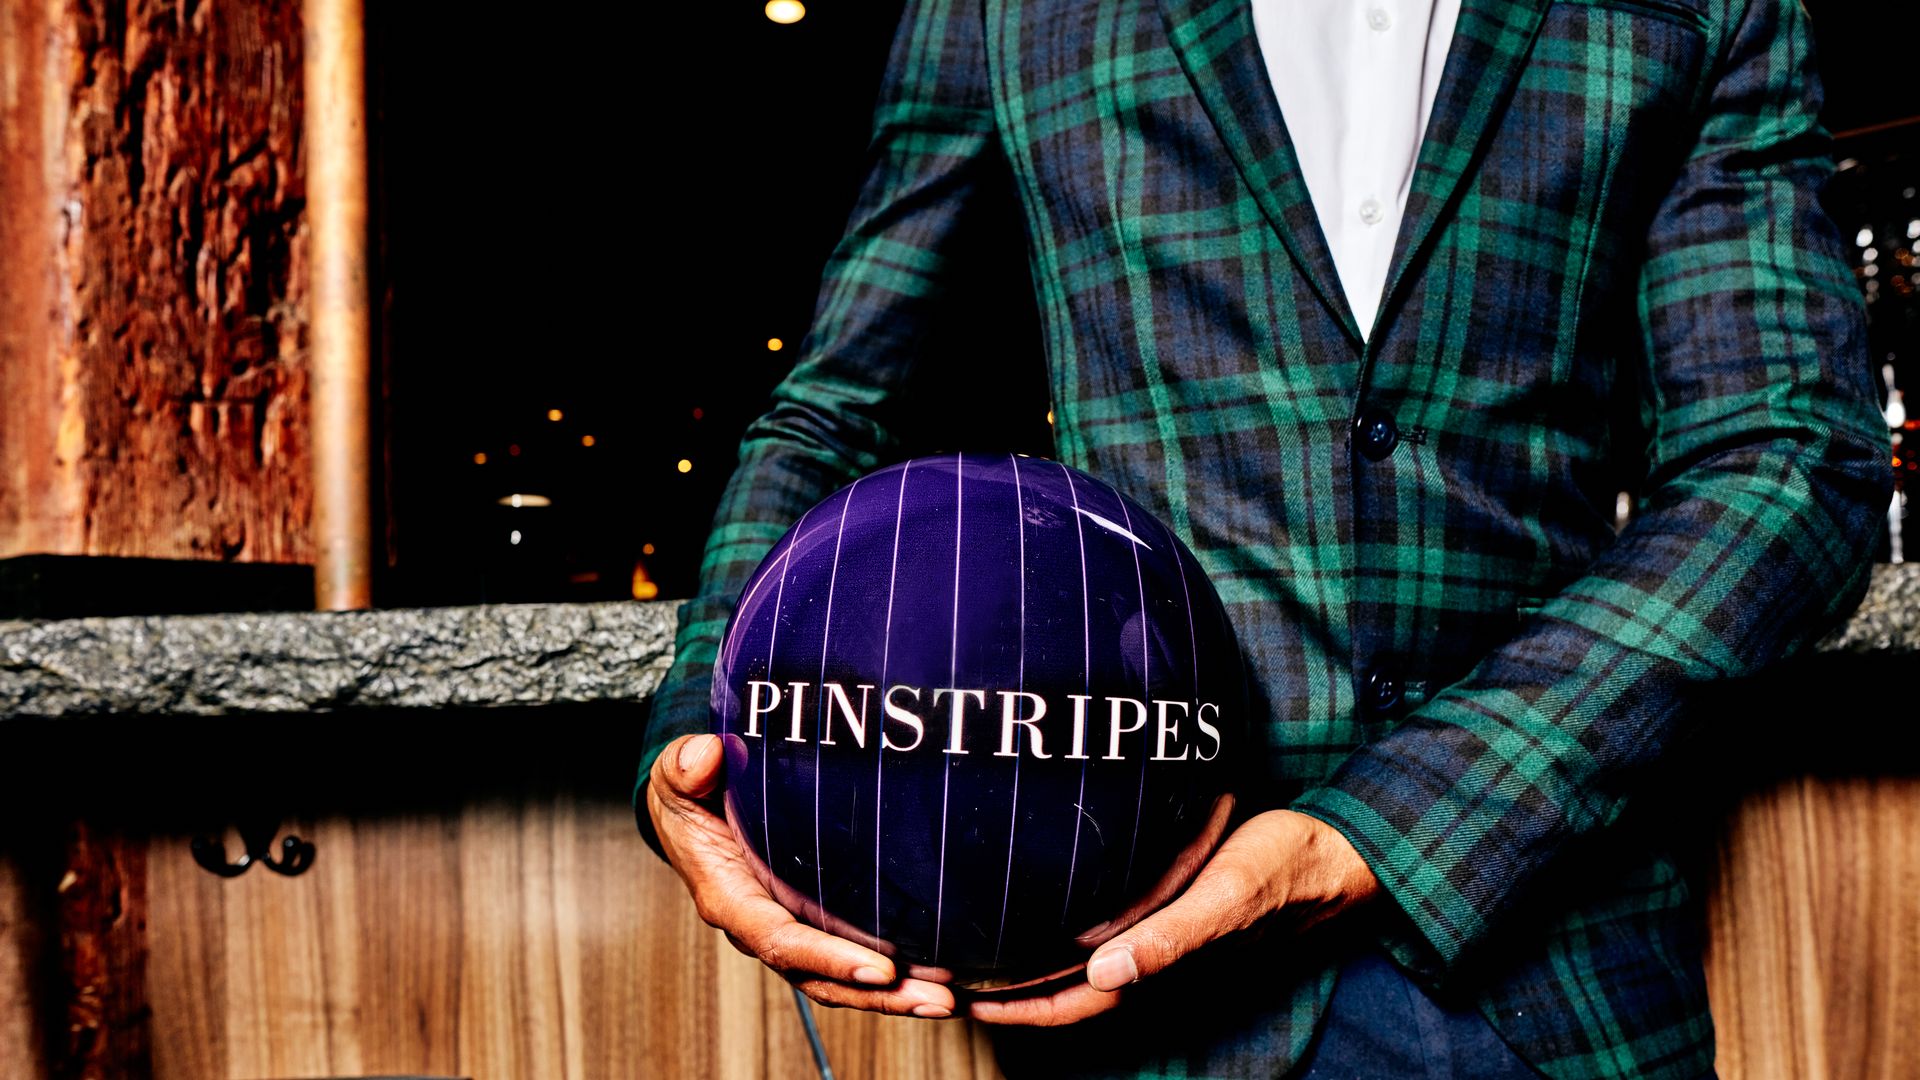 A person in a striped suit holds a purple bowling ball that says "Pinstripes" on it.